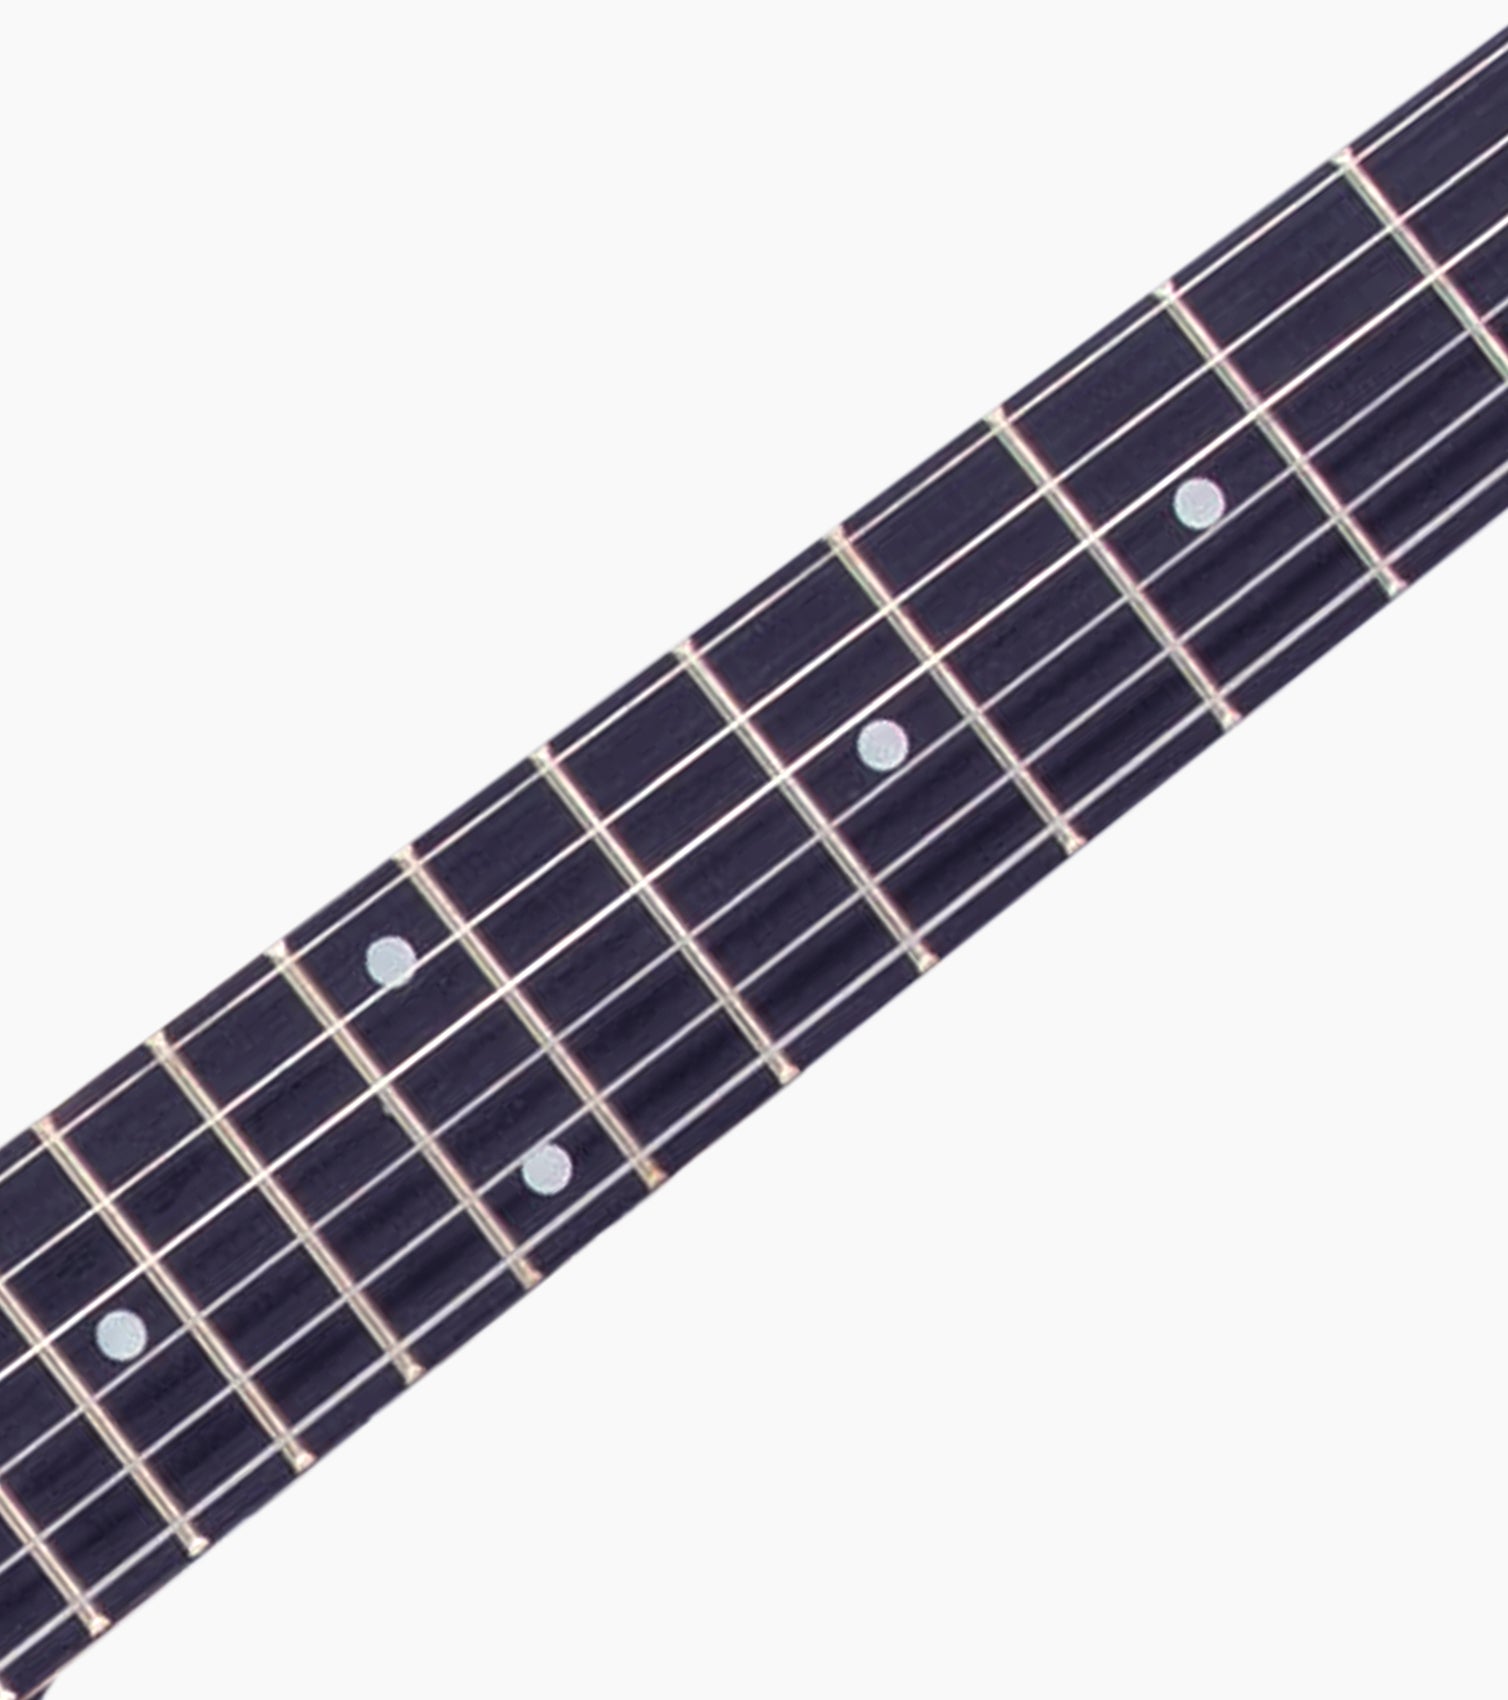 close-up of Red double-cutaway beginner electric guitar fretboard